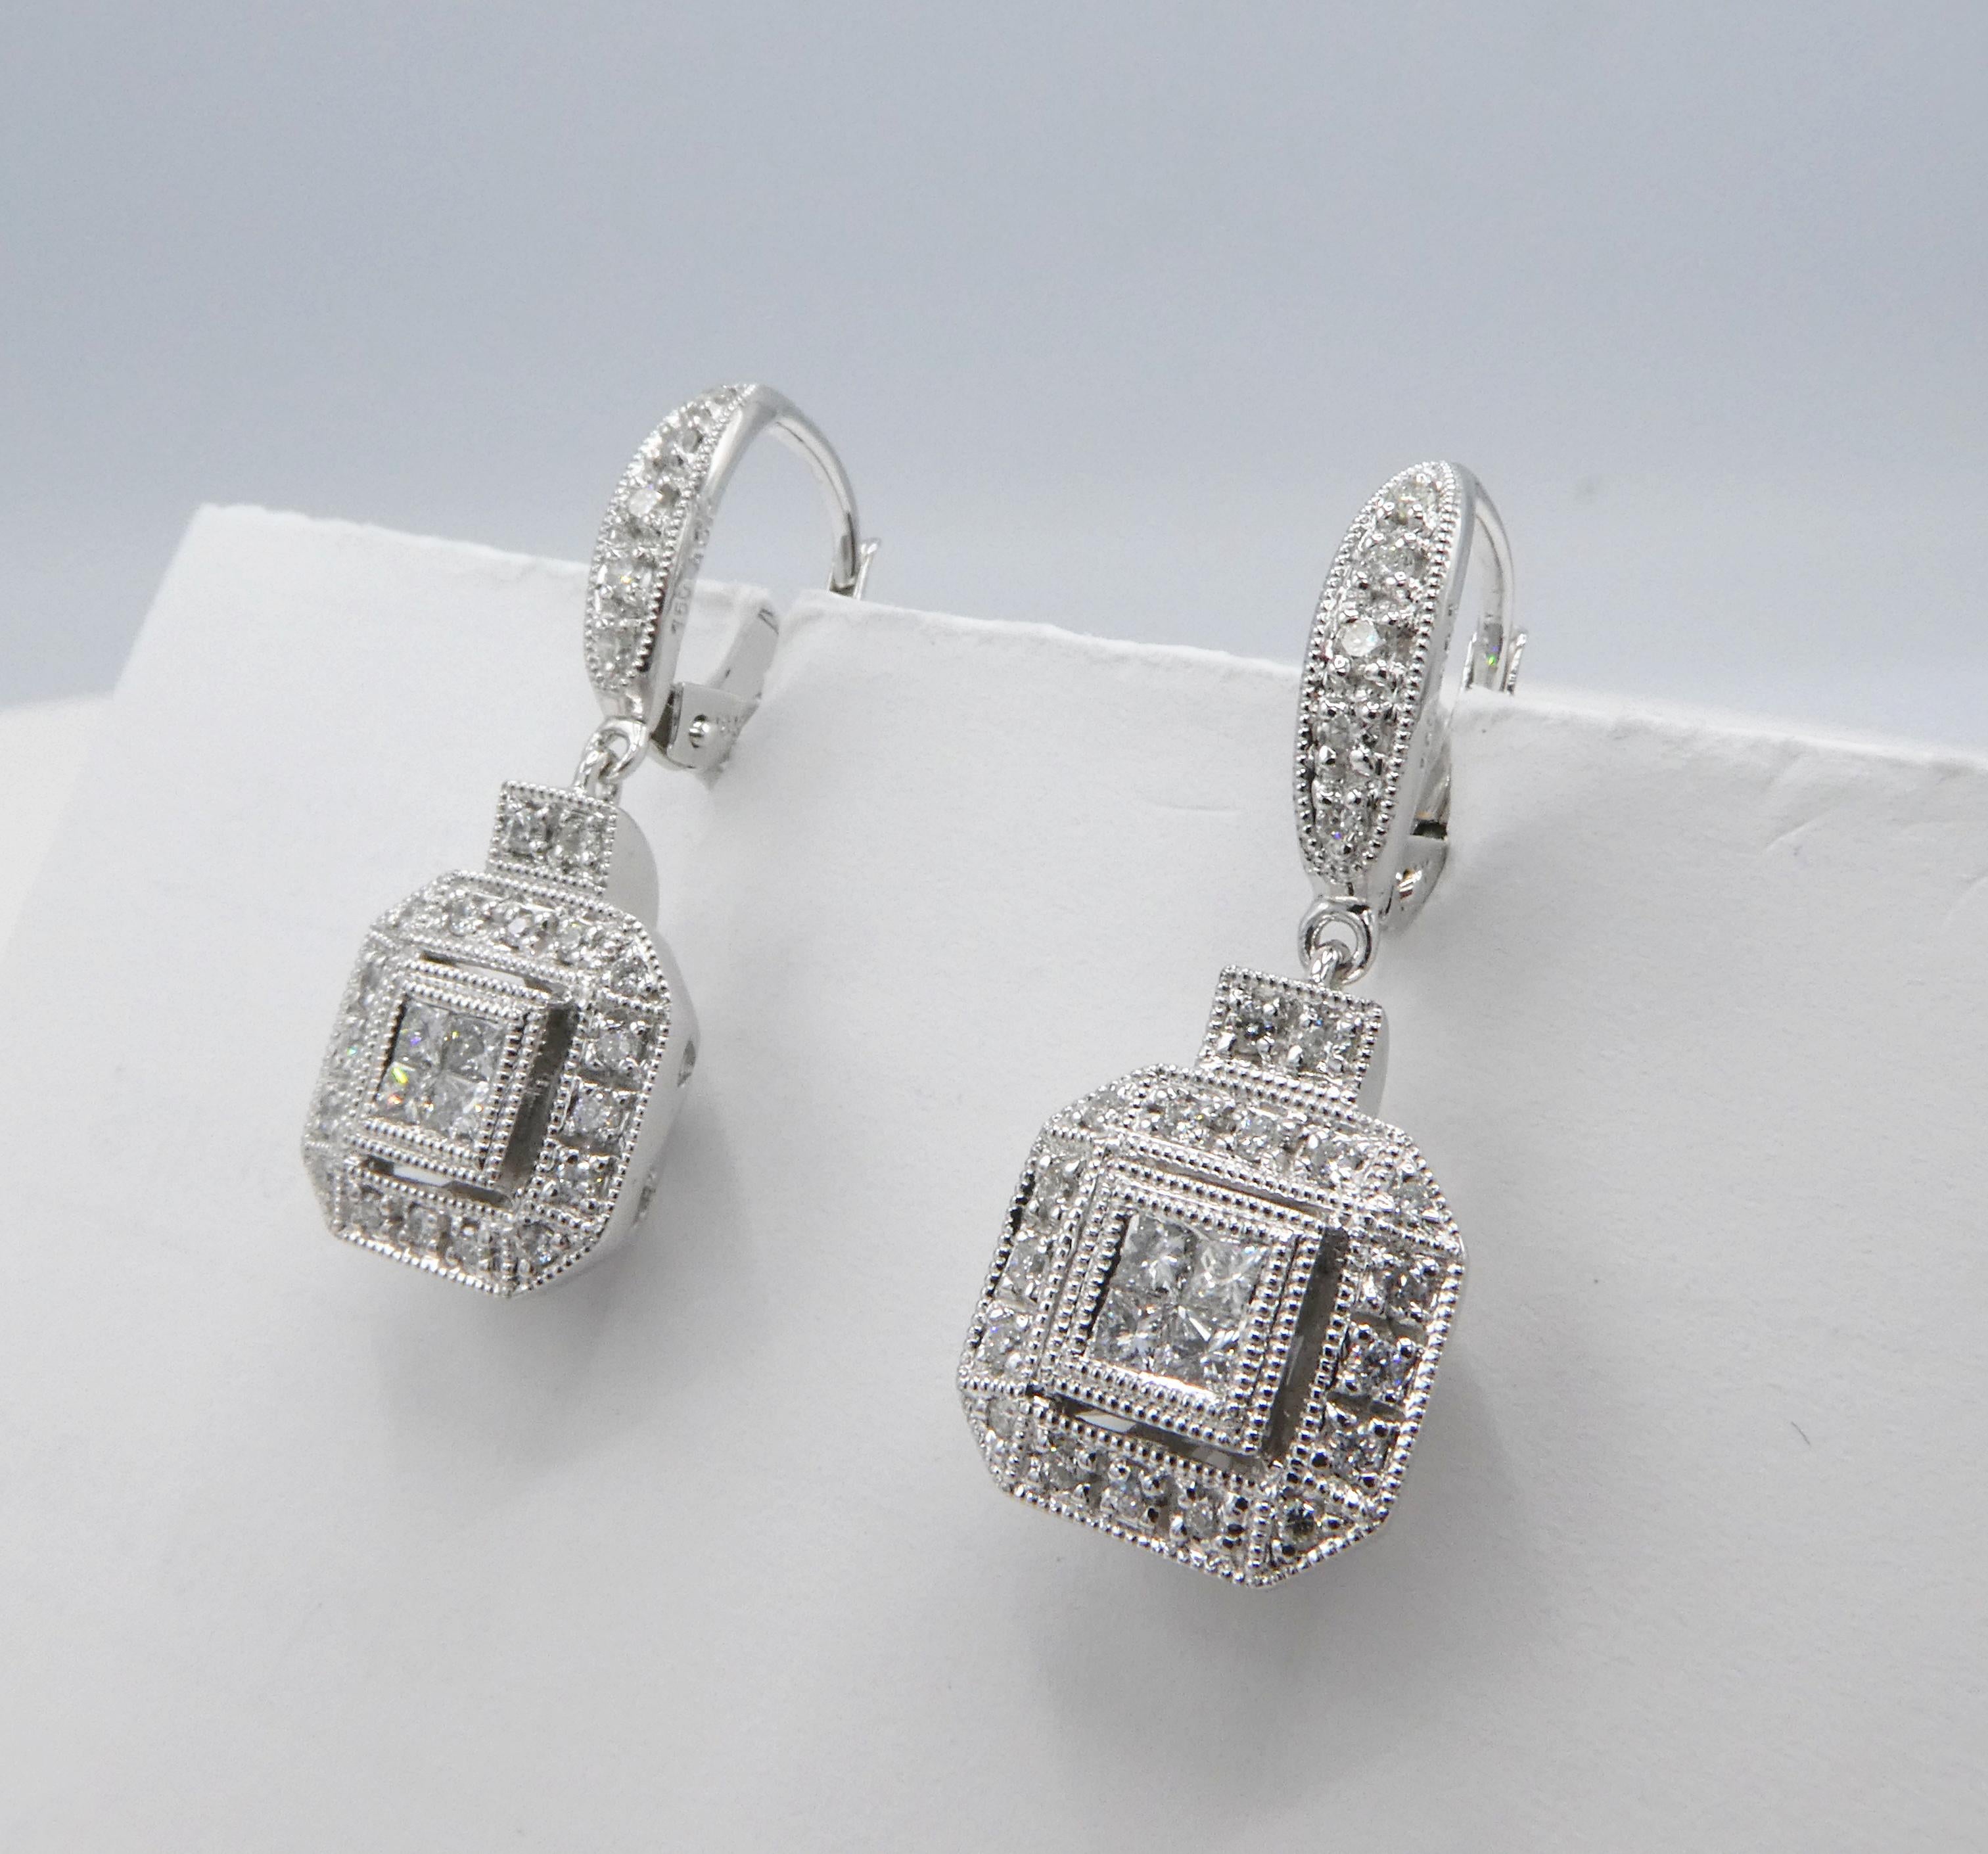 Diamond Square Dangle 18K White Gold Huggie Earrings Cluster Pave Round Diamonds

Metal: 18K White Gold 750
Weight: 6.68 grams
Measures 9.57mm wide and 1 inch long
Diamonds: 8 princess cuts and 46 round diamonds approx. .50 CTW G-H SI
Stamped: 